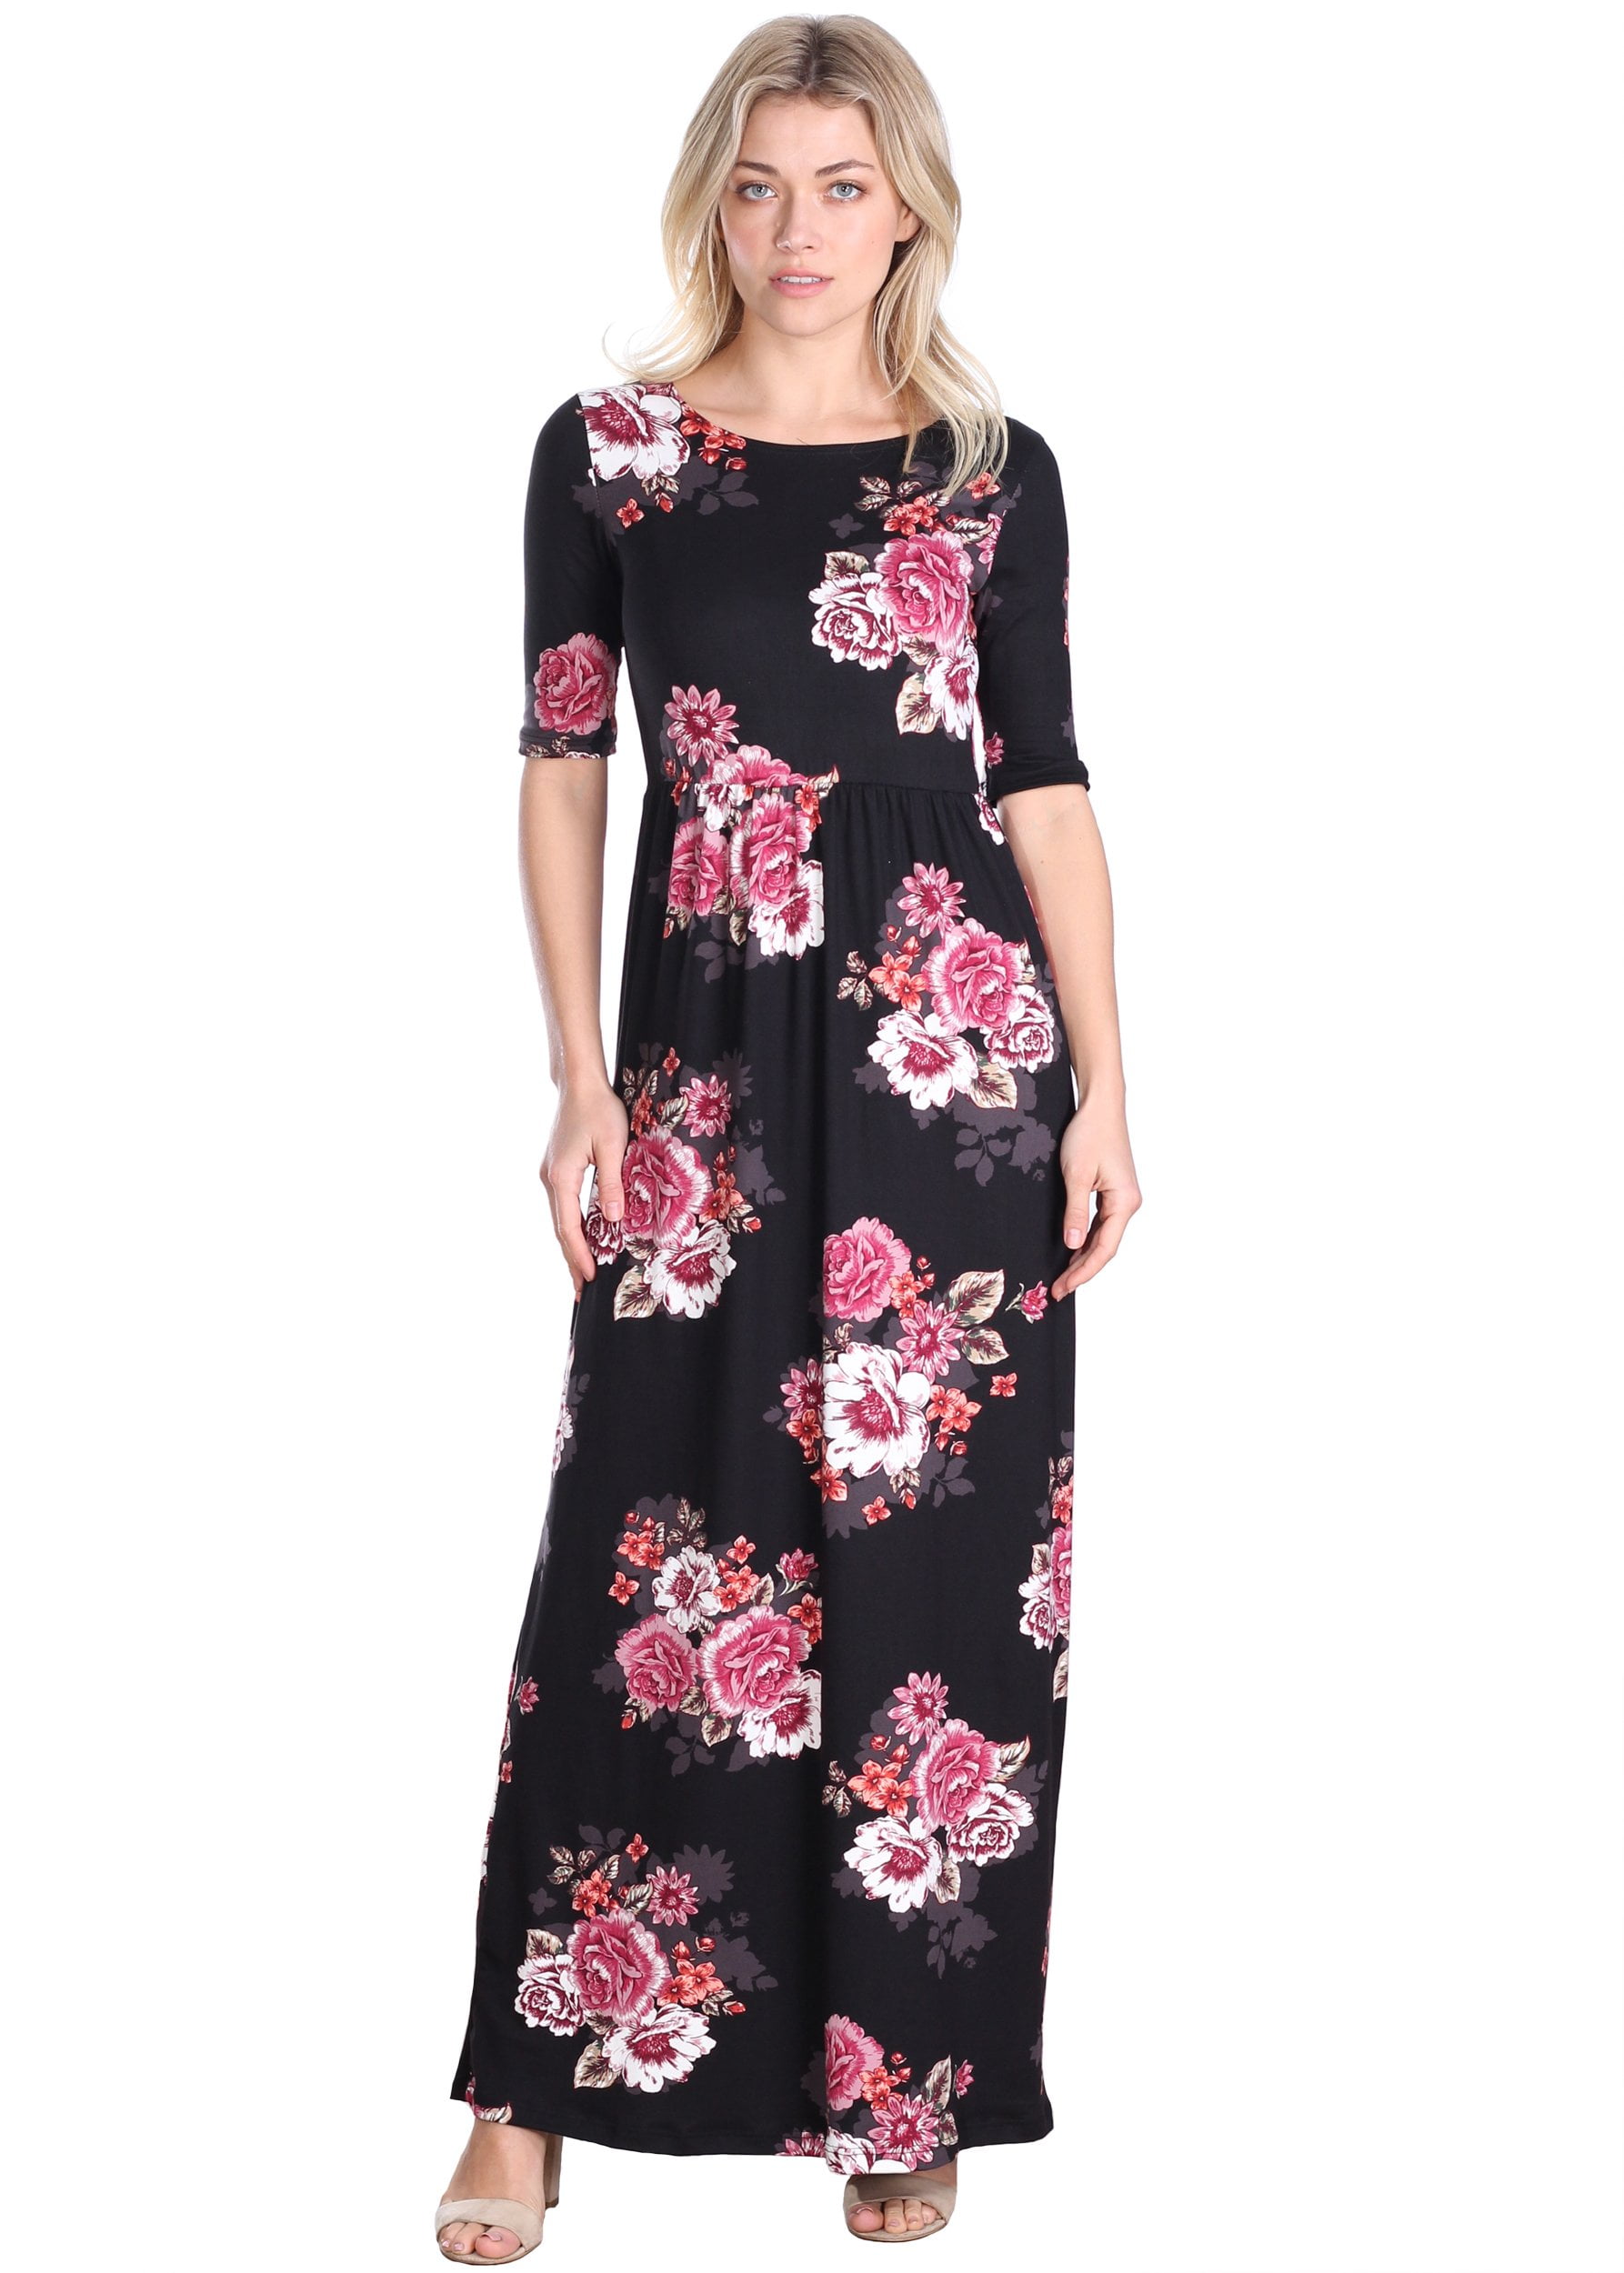 Cut & Paste - Women's 3/4 Sleeve Printed Maxi Dress, DT08 - Made in USA ...